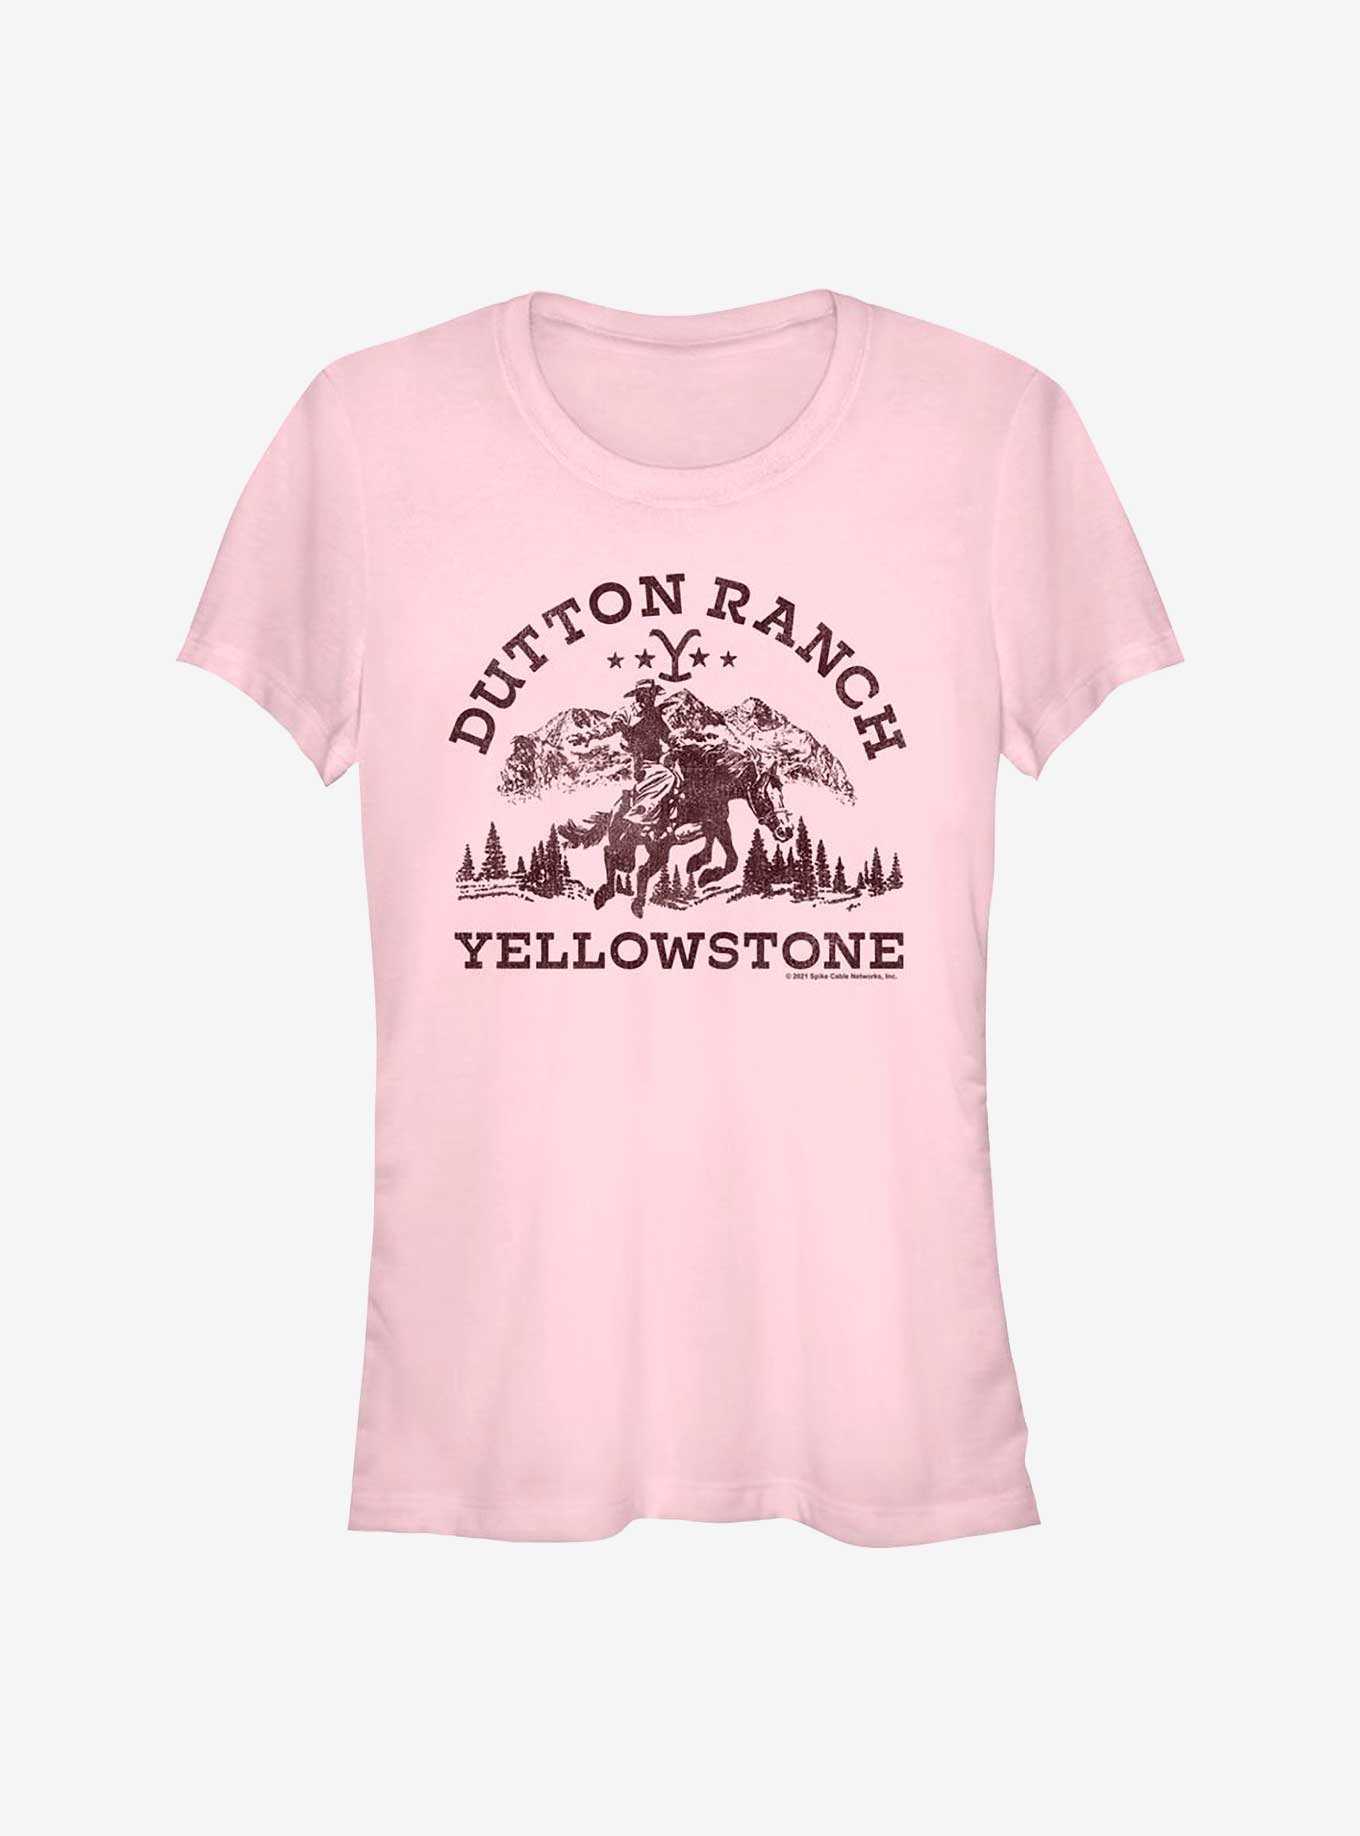 Yellowstone Into The Wild Girls T-Shirt, , hi-res